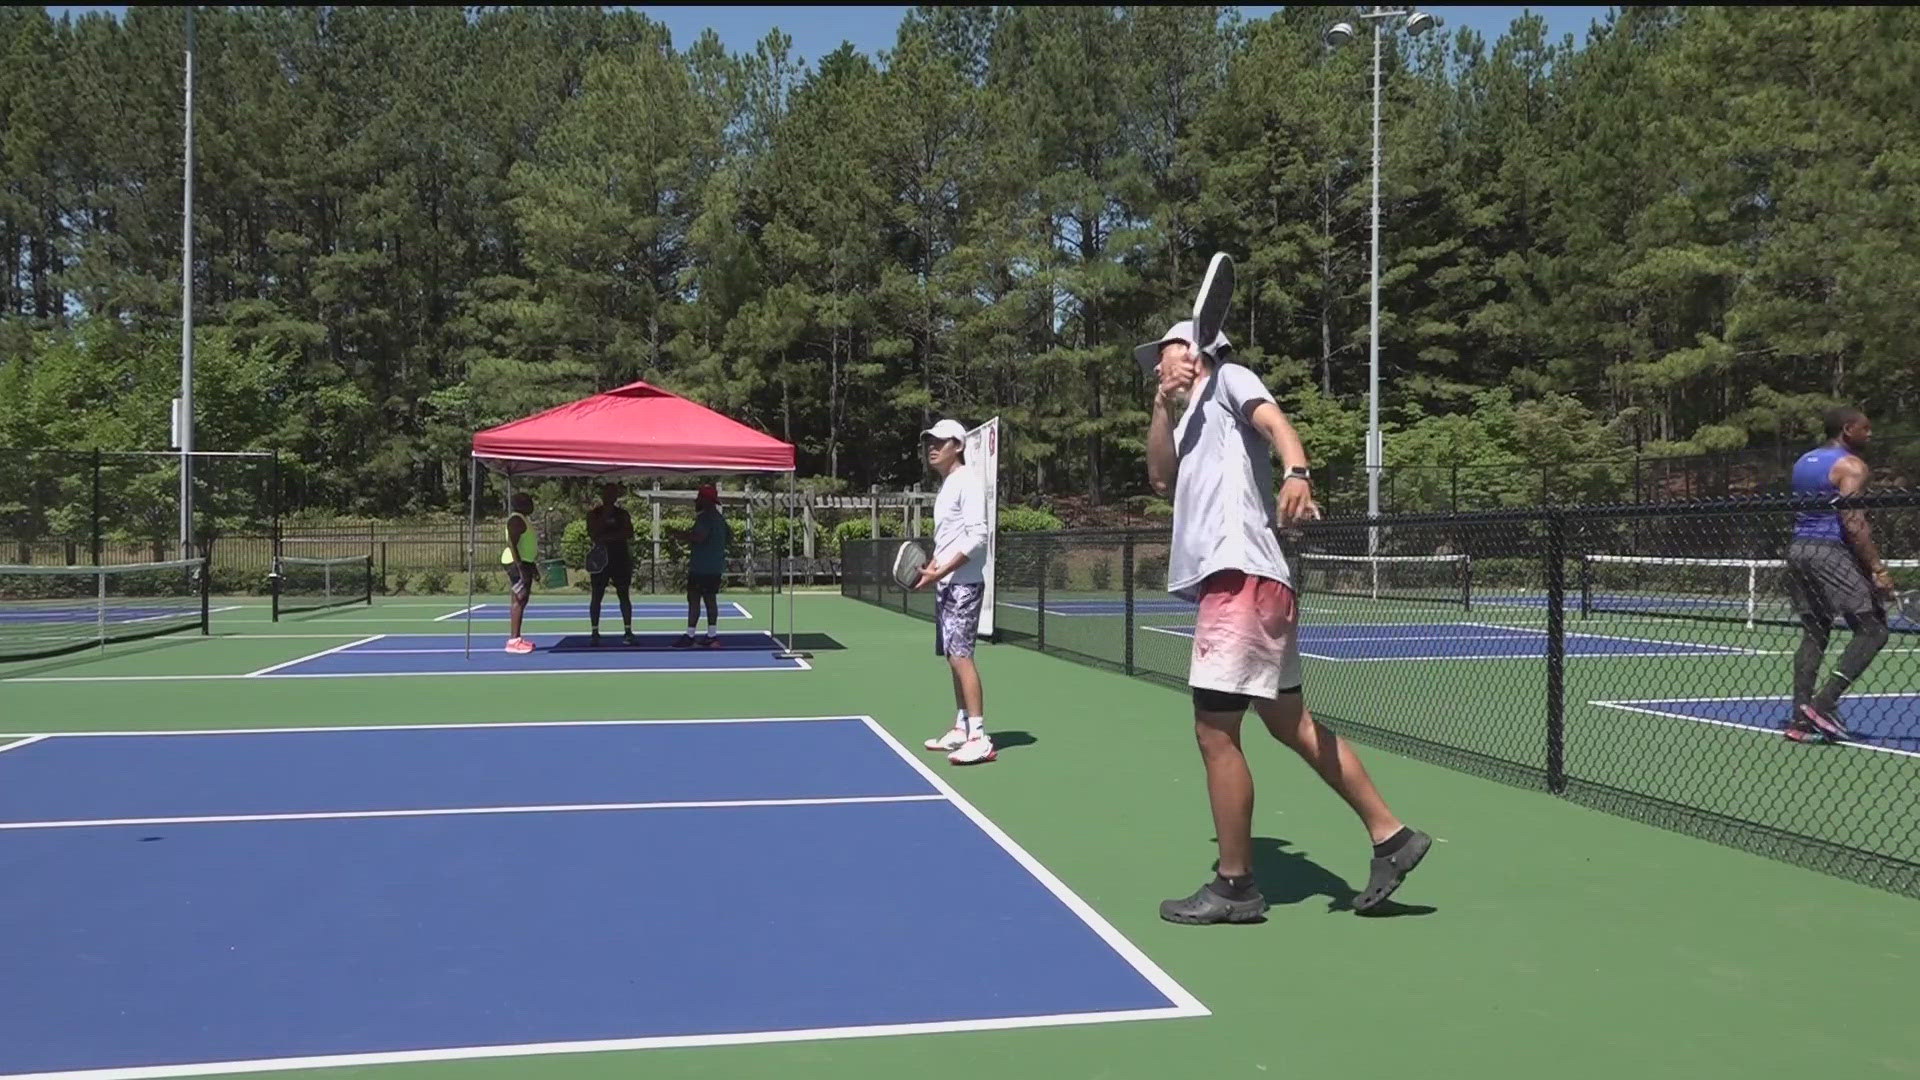 A Clayton County tennis center that closed earlier this year for a major reconstruction project reopened on Wednesday